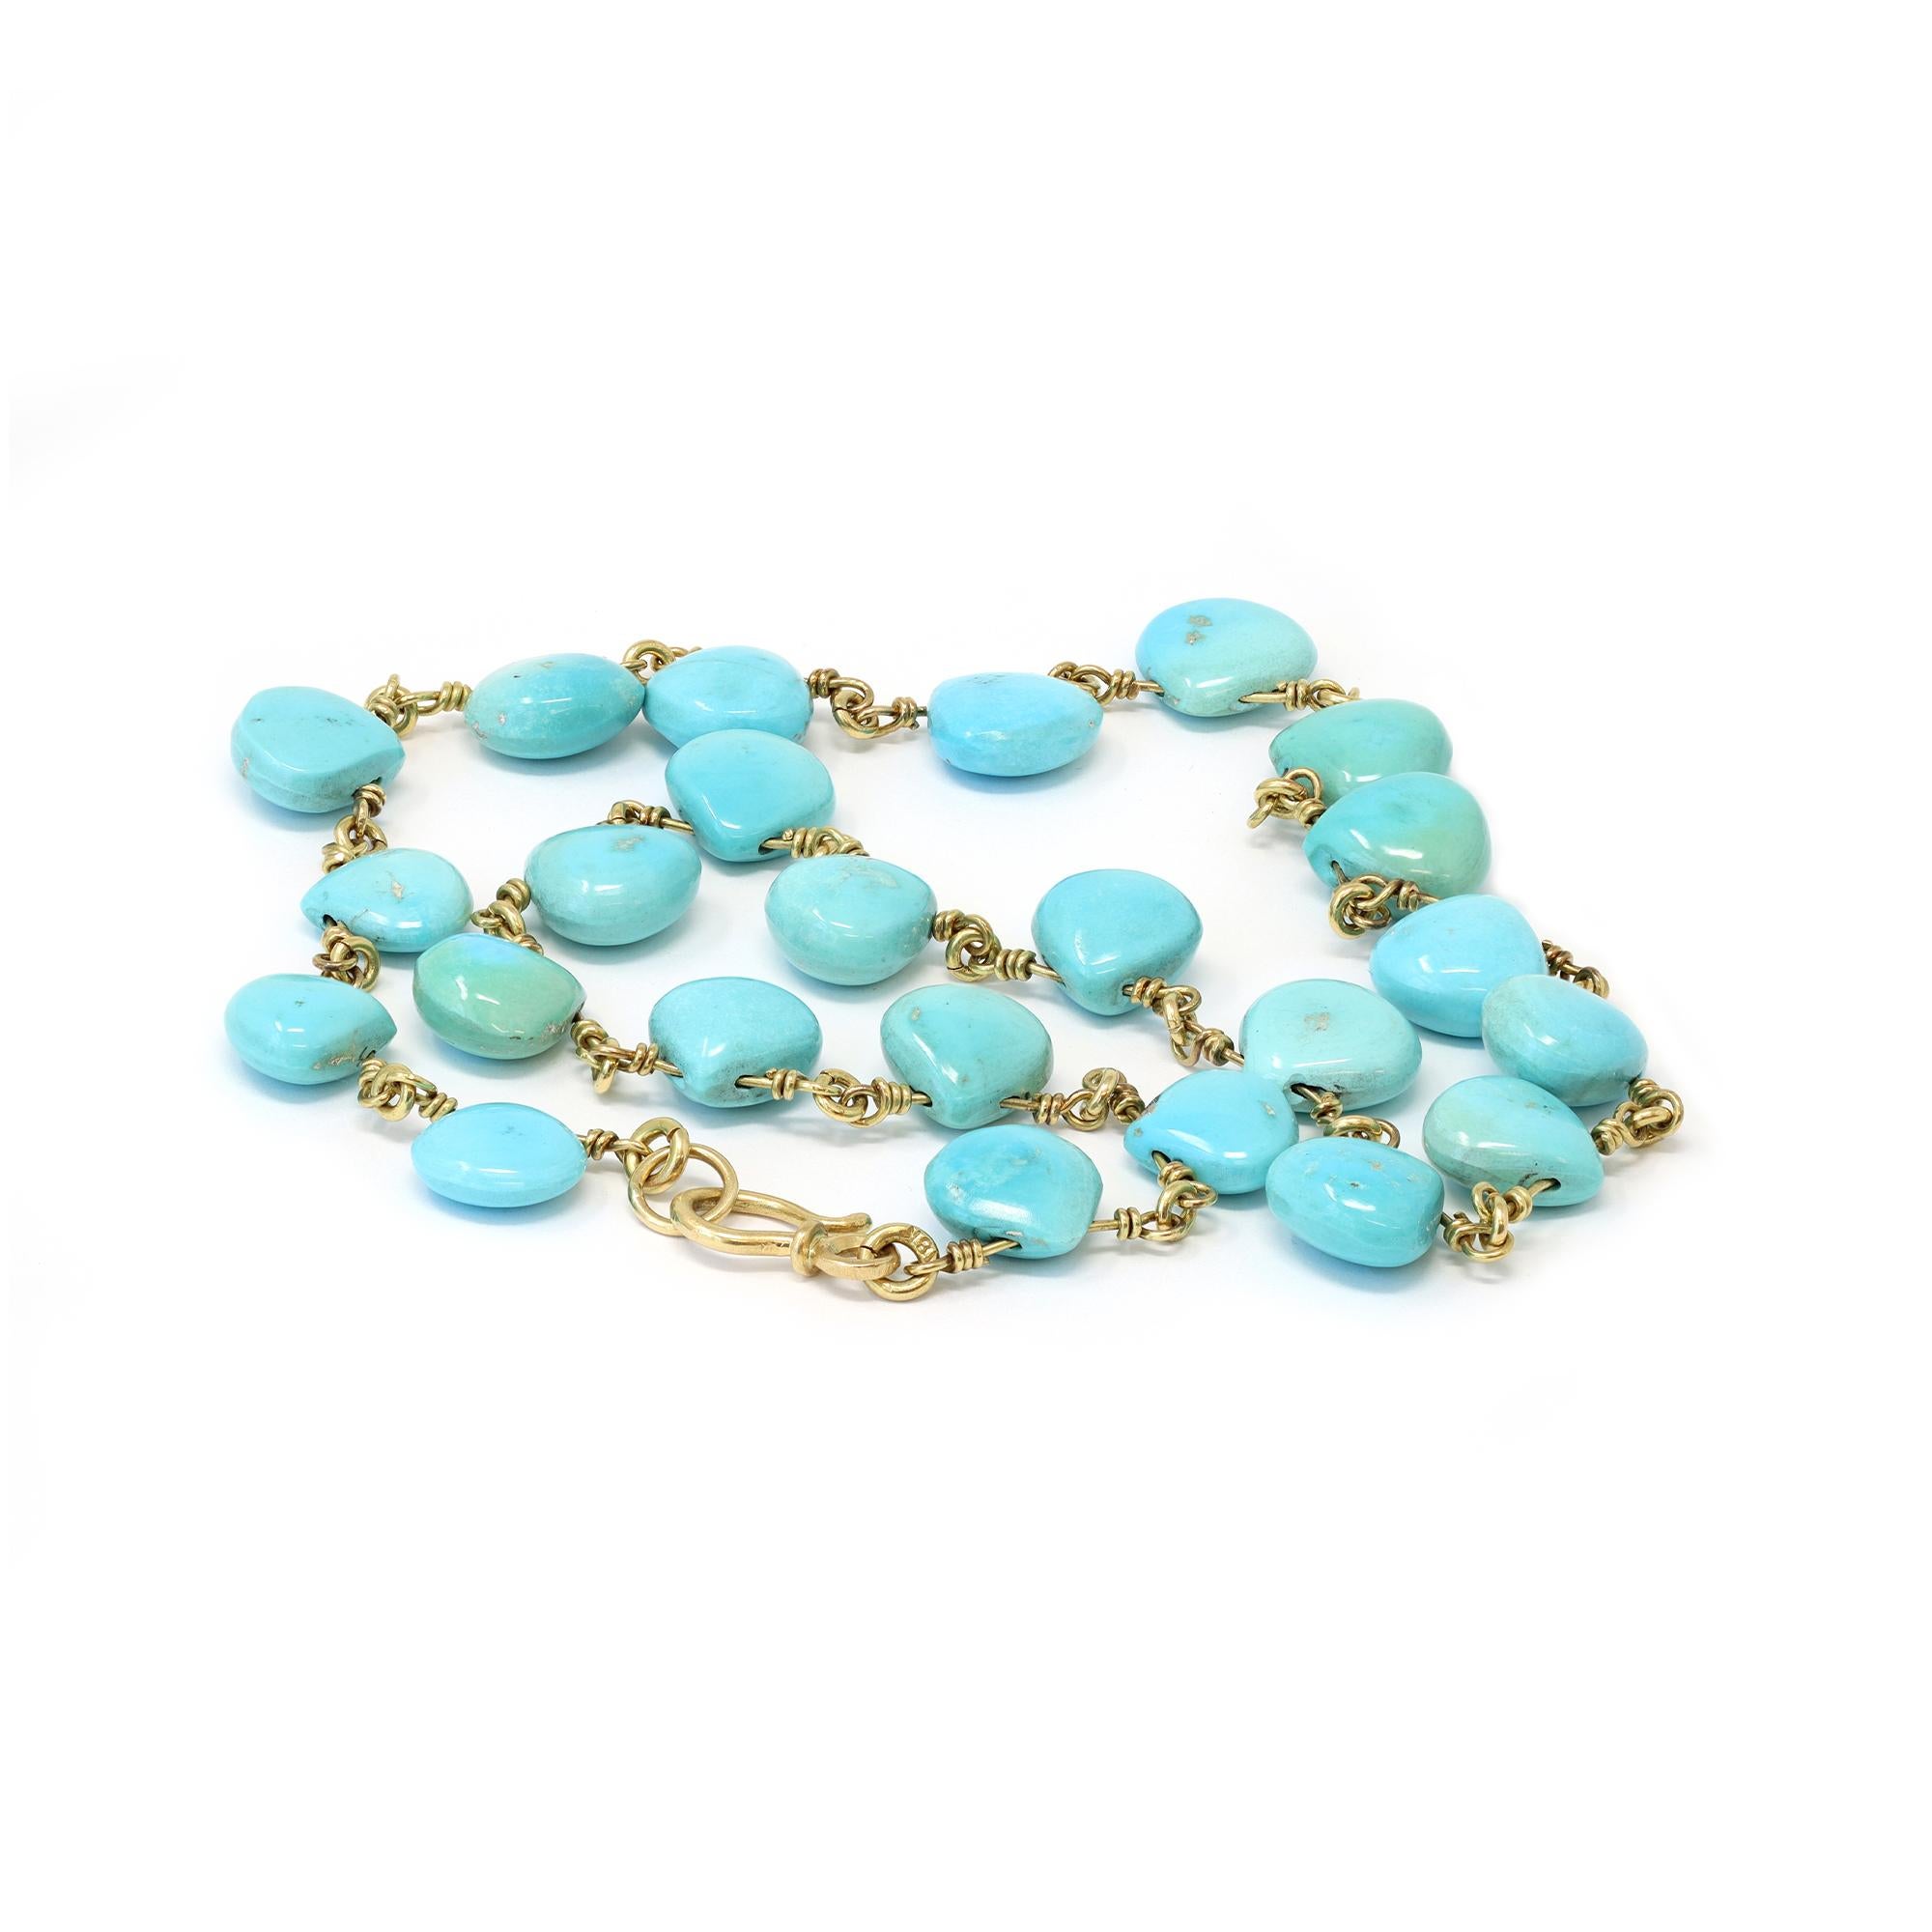 A handmade wired necklace featuring natural untreated turquoise beads. The turquoise beads are calibrated drop shape, very well matched in color. The necklace is made in 18 karat yellow gold. It has a gross weight of 53 grams and measures 17” long.
